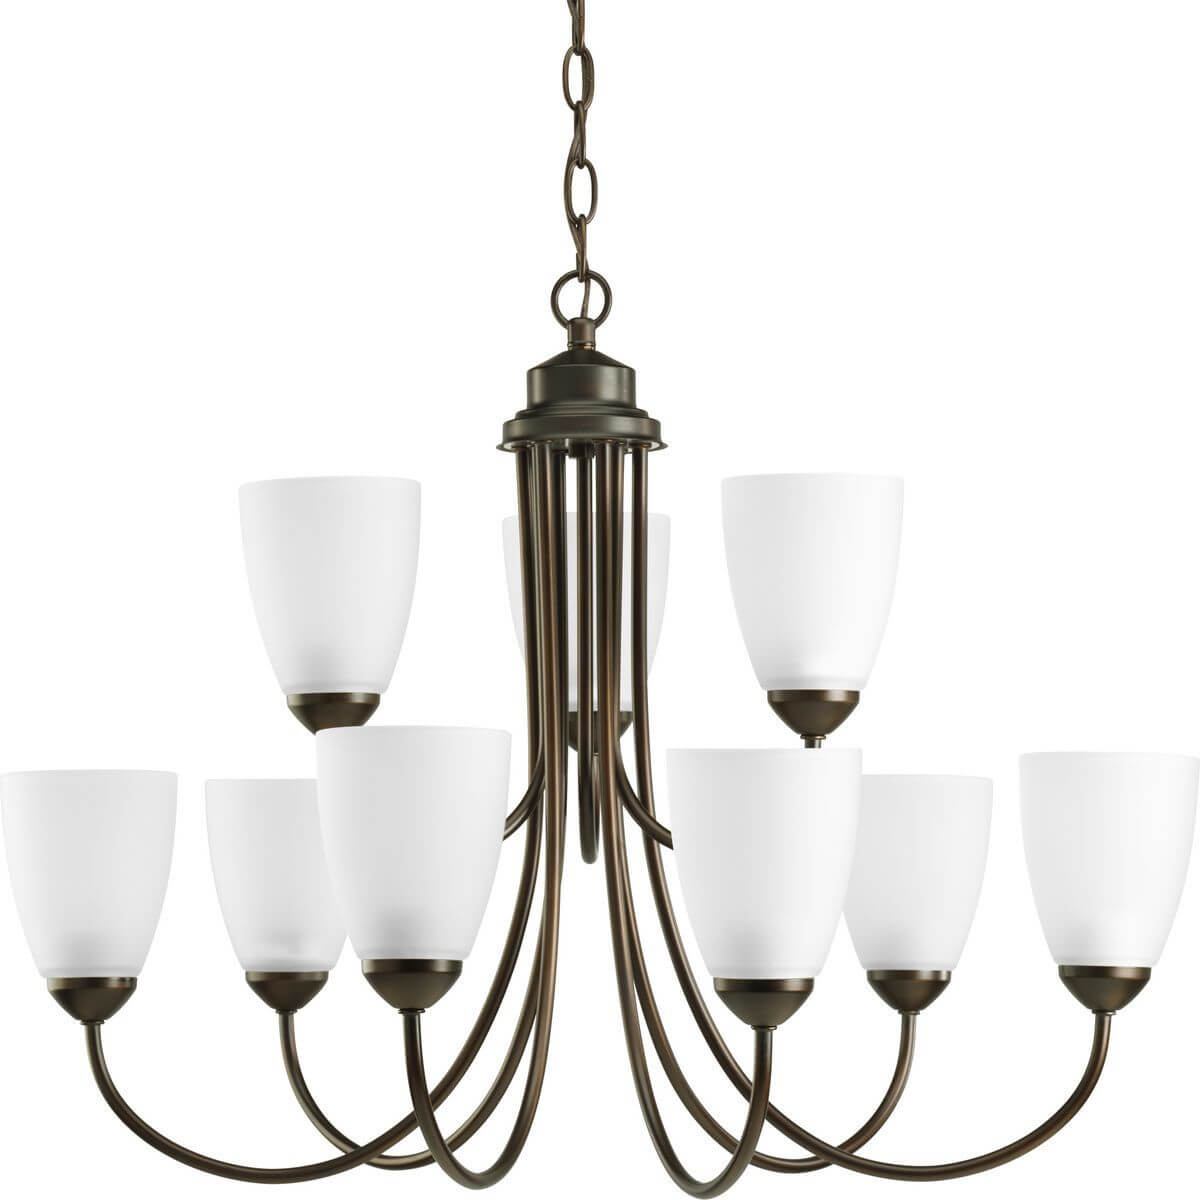 Progress Lighting Gather 9 Light 28 inch Chandelier in Antique Bronze with Etched Glass P4627-20